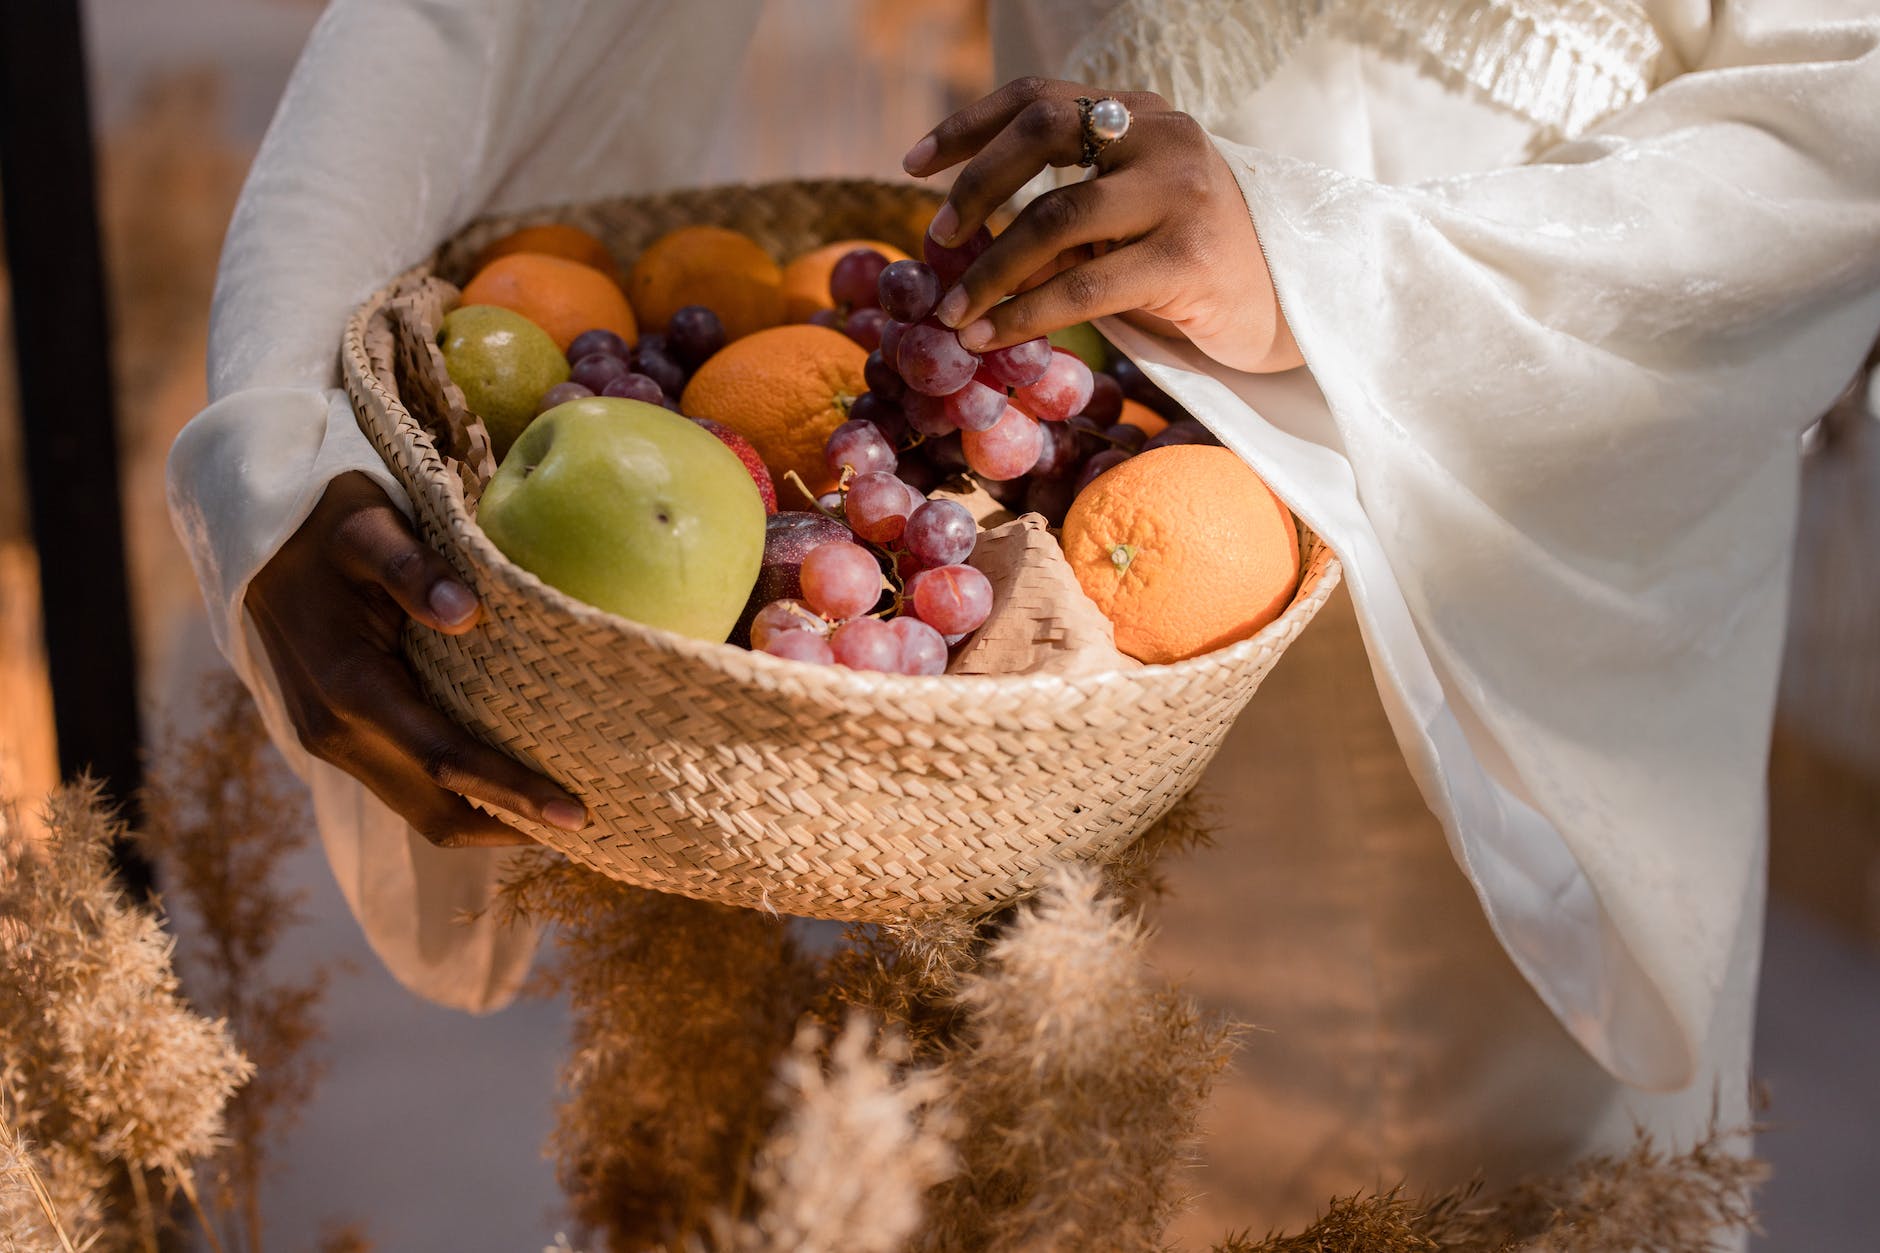 assorted fruits on a woven basket